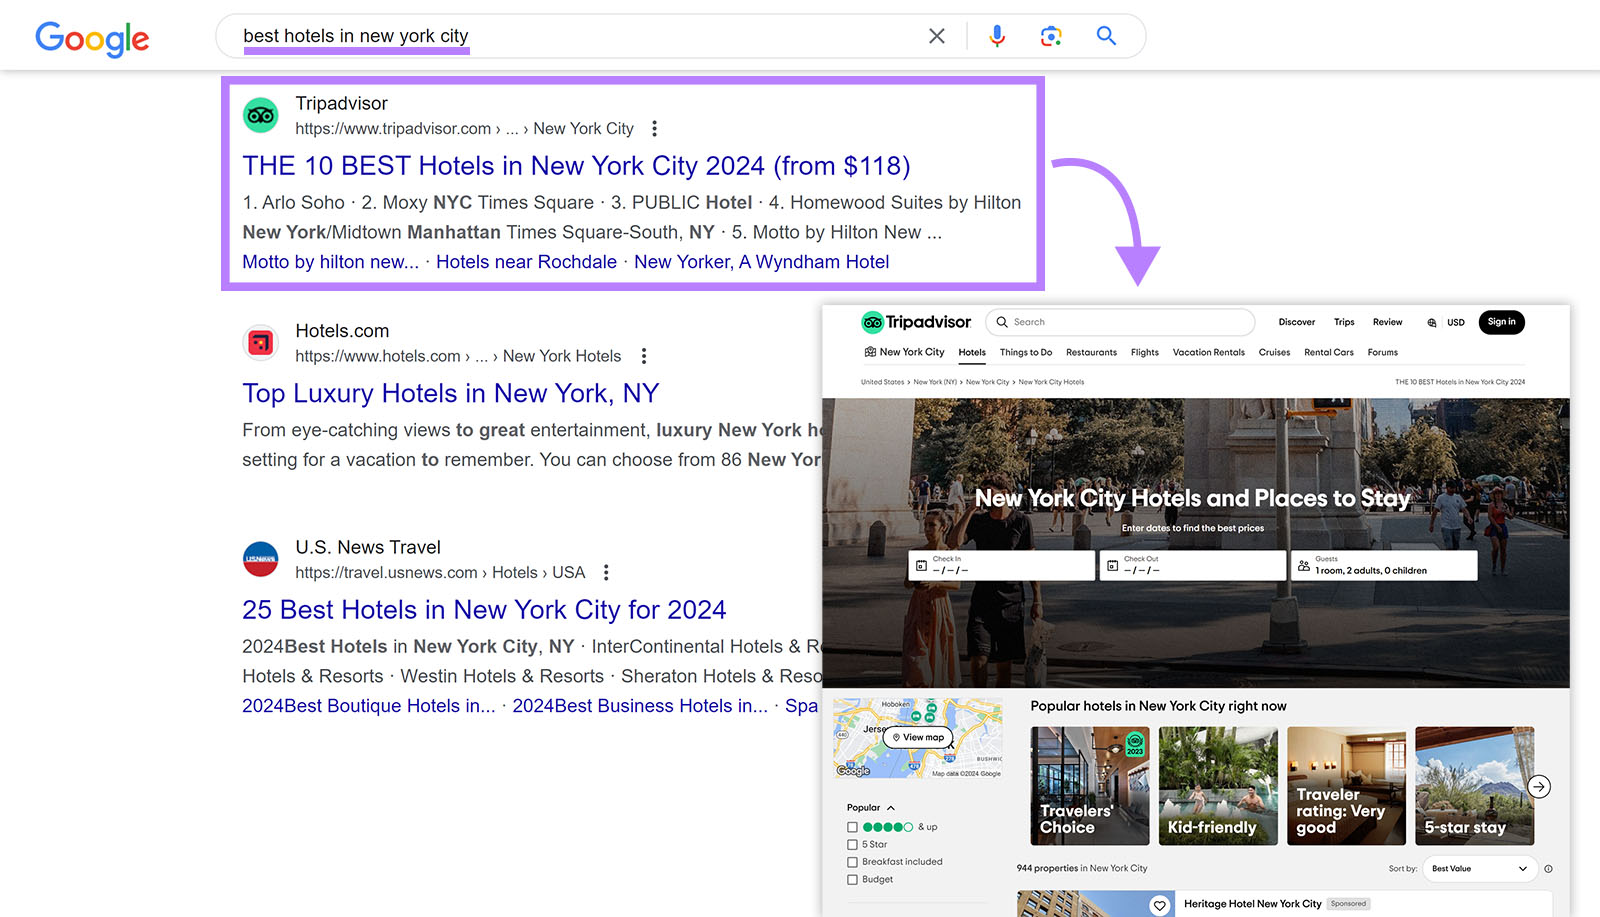 Google search results and Tripadvisor page superimposed with arrow pointing from search result to page.